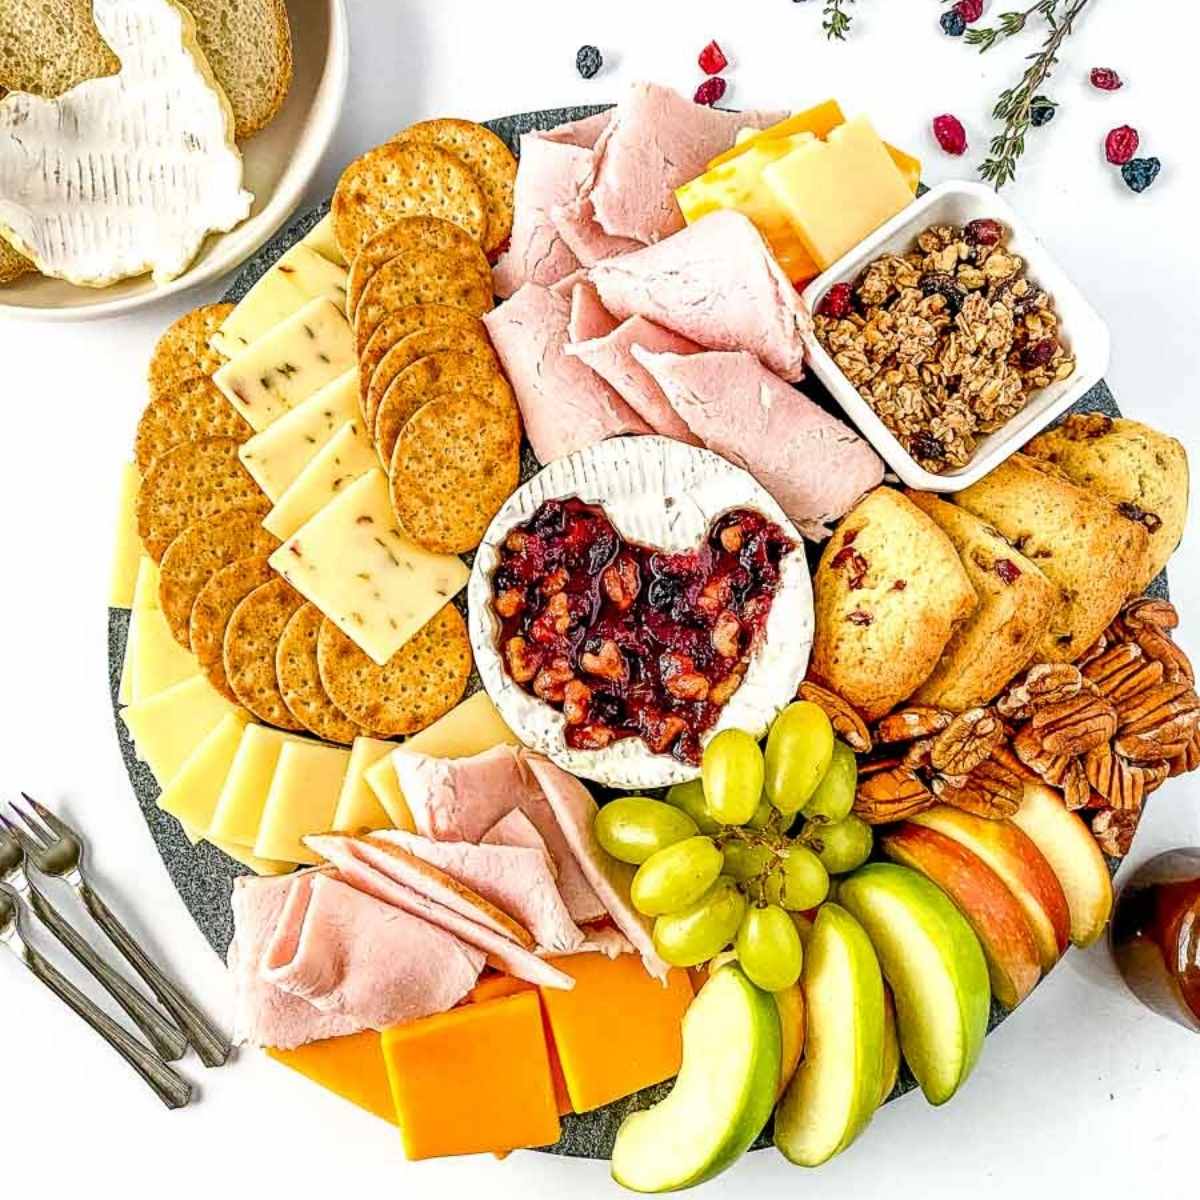 https://www.areinventedmom.com/wp-content/uploads/2021/10/thanksgiving-charcuterie-board-featured-image.jpg